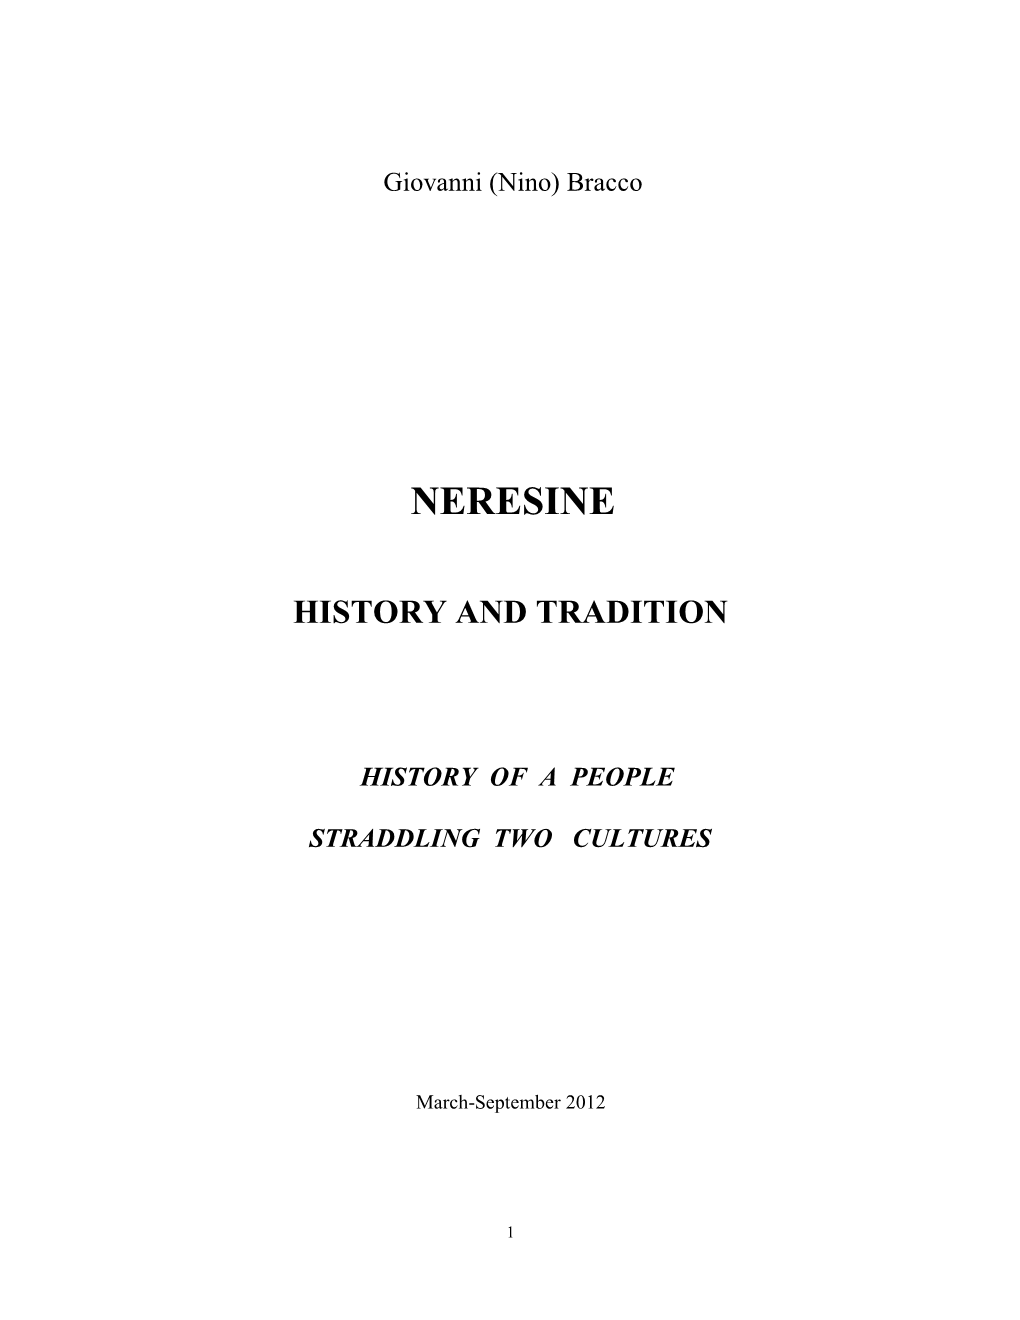 Neresine History and Tradition History of a People Straddling Two Cultures